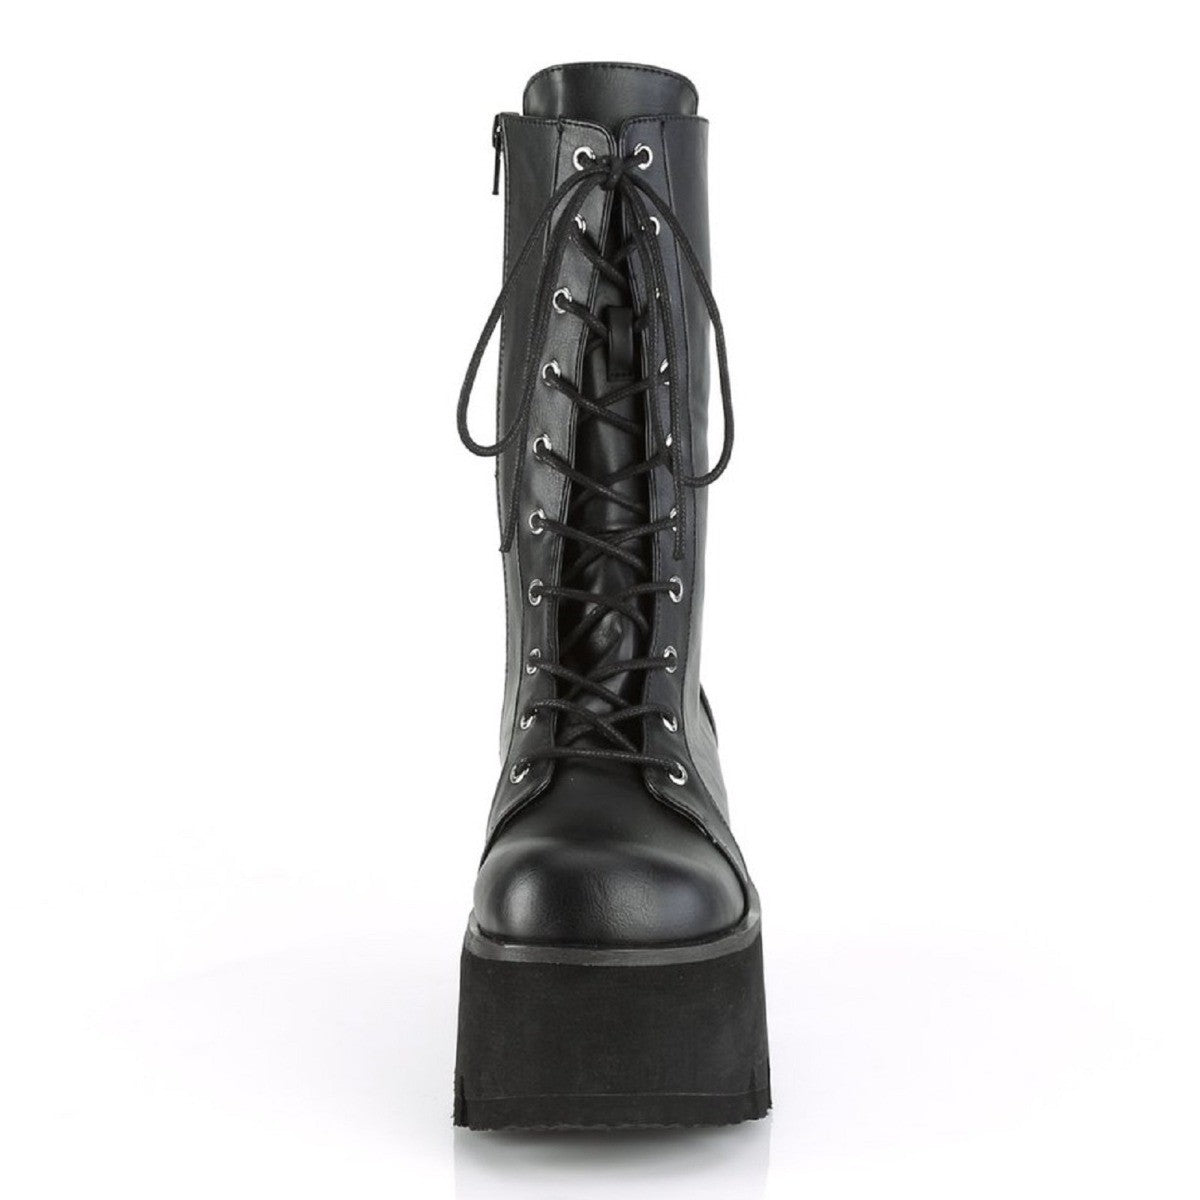 Demonia Ashes 105 Chunky Heel Lace-Up Mid Calf Platform Boots